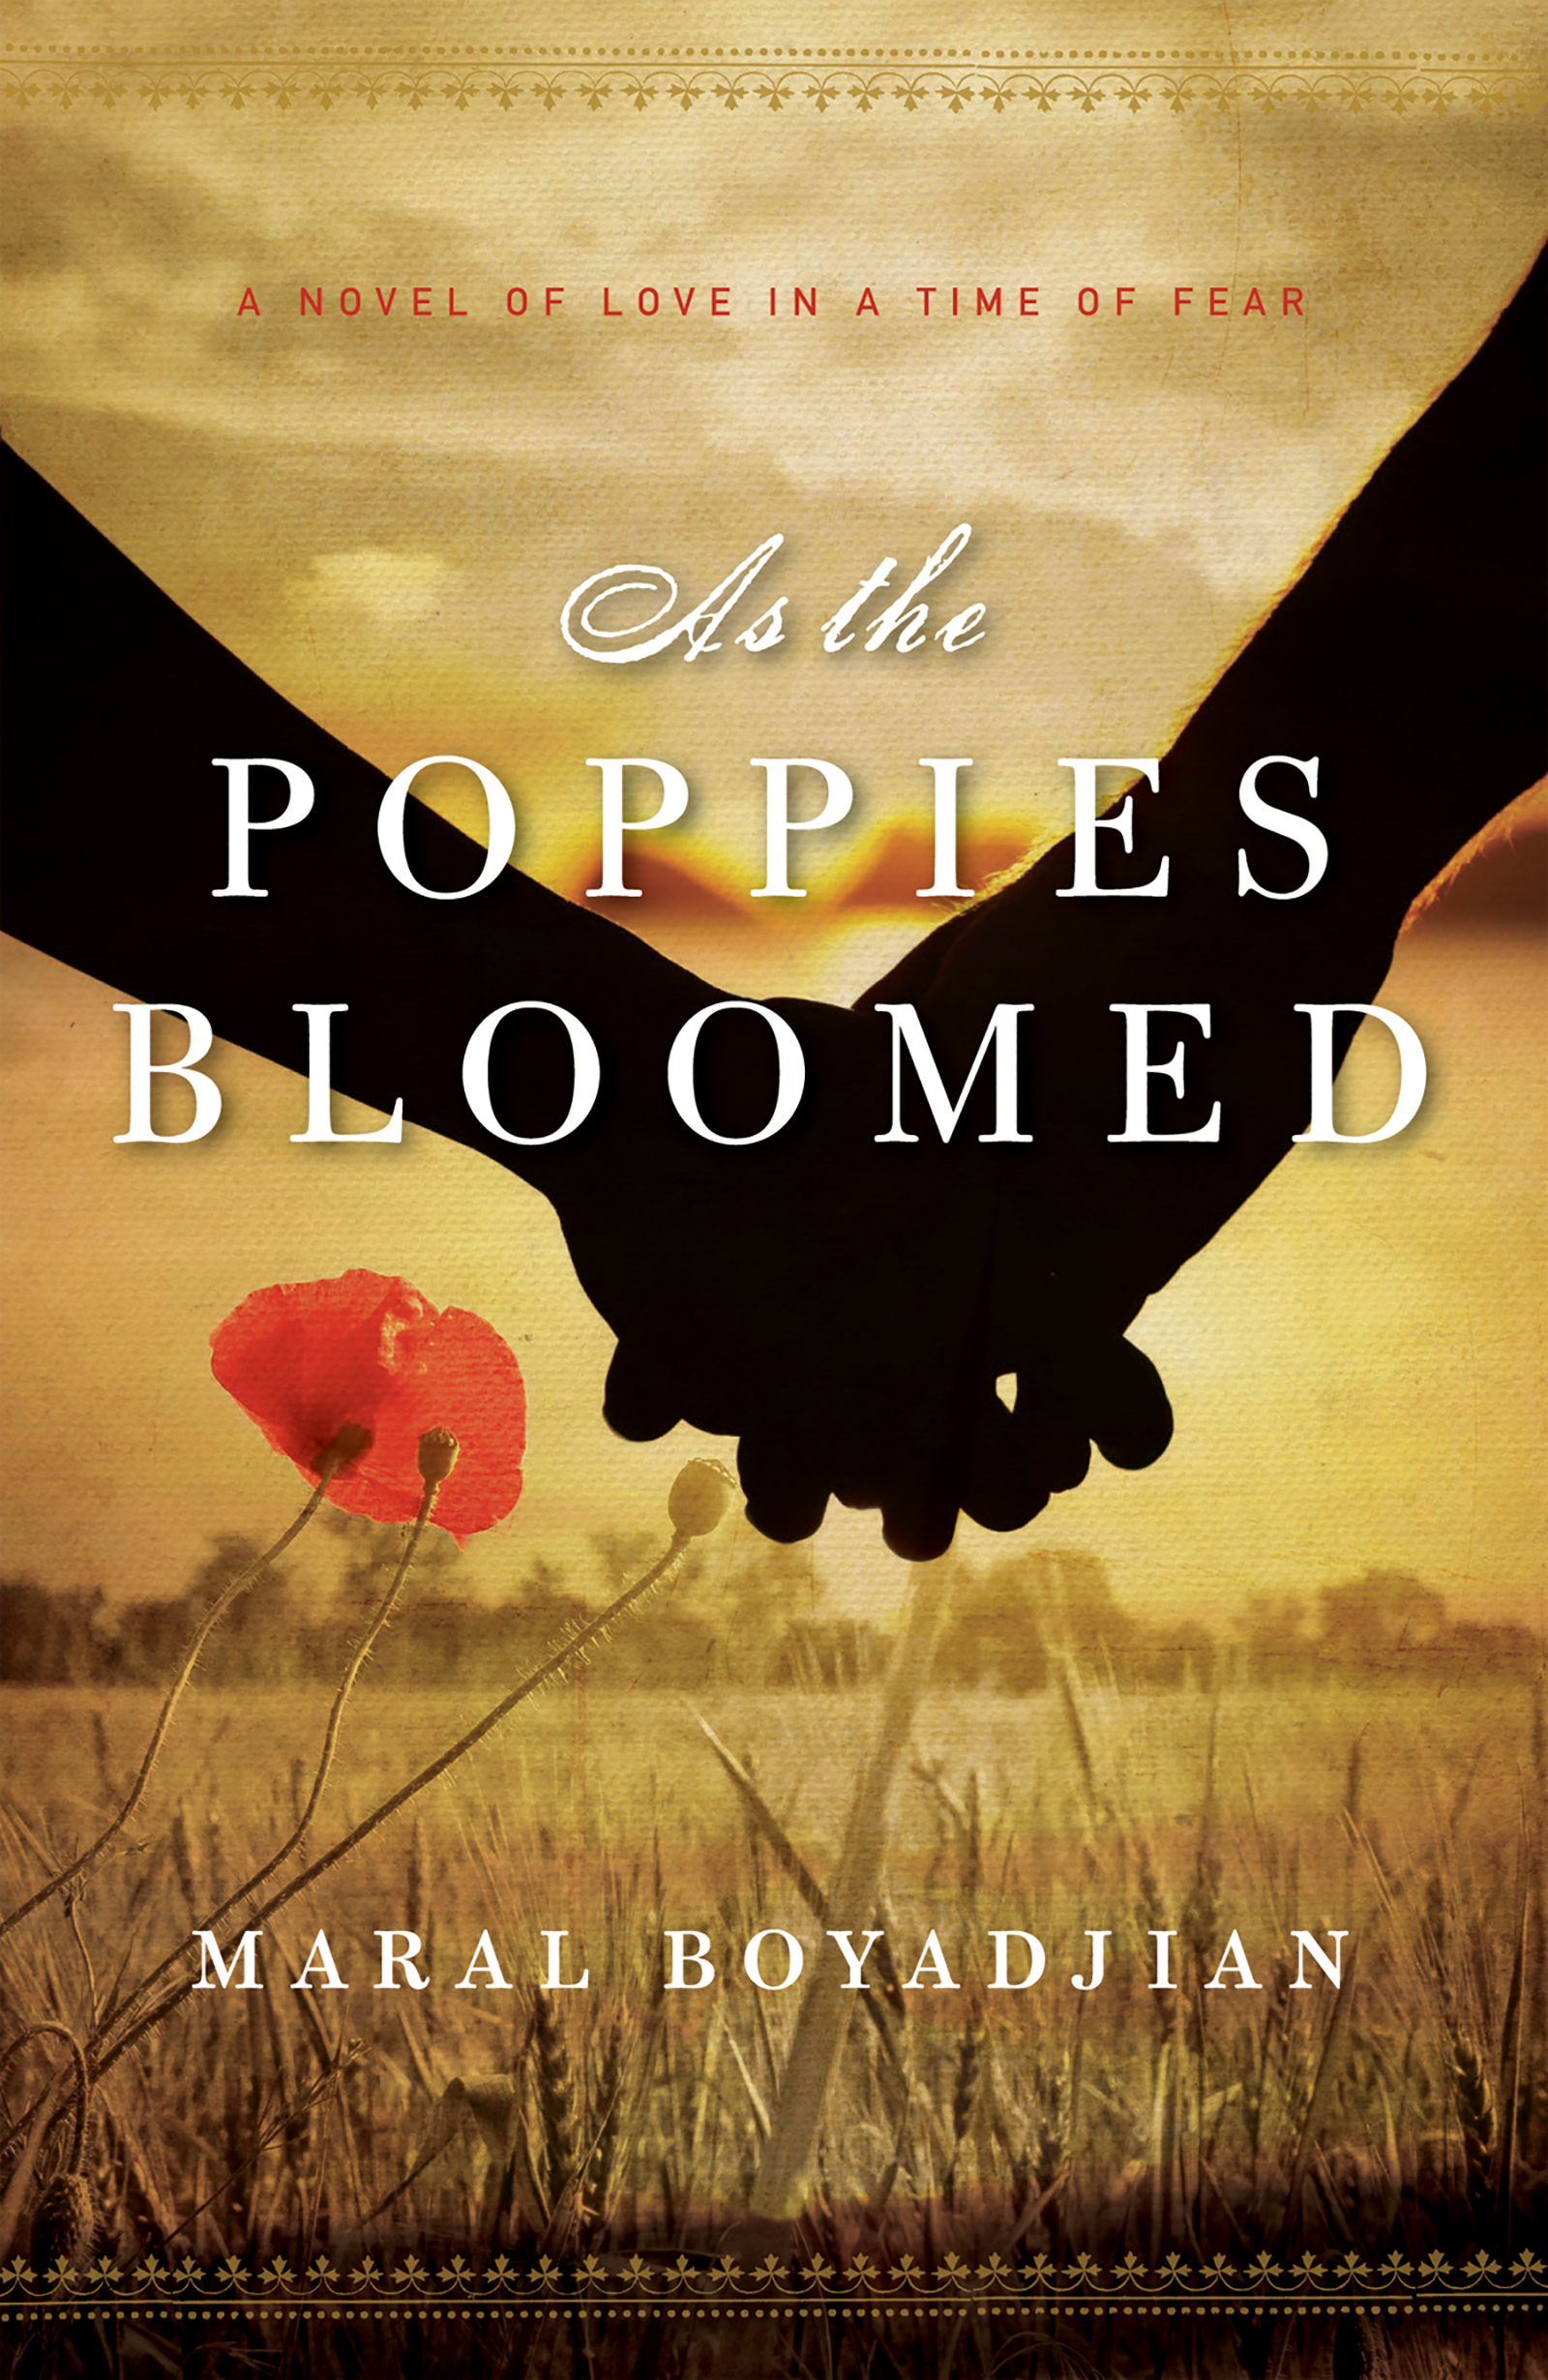 Image de couverture de As the Poppies Bloomed [electronic resource] : A Novel of Love in a Time of Fear